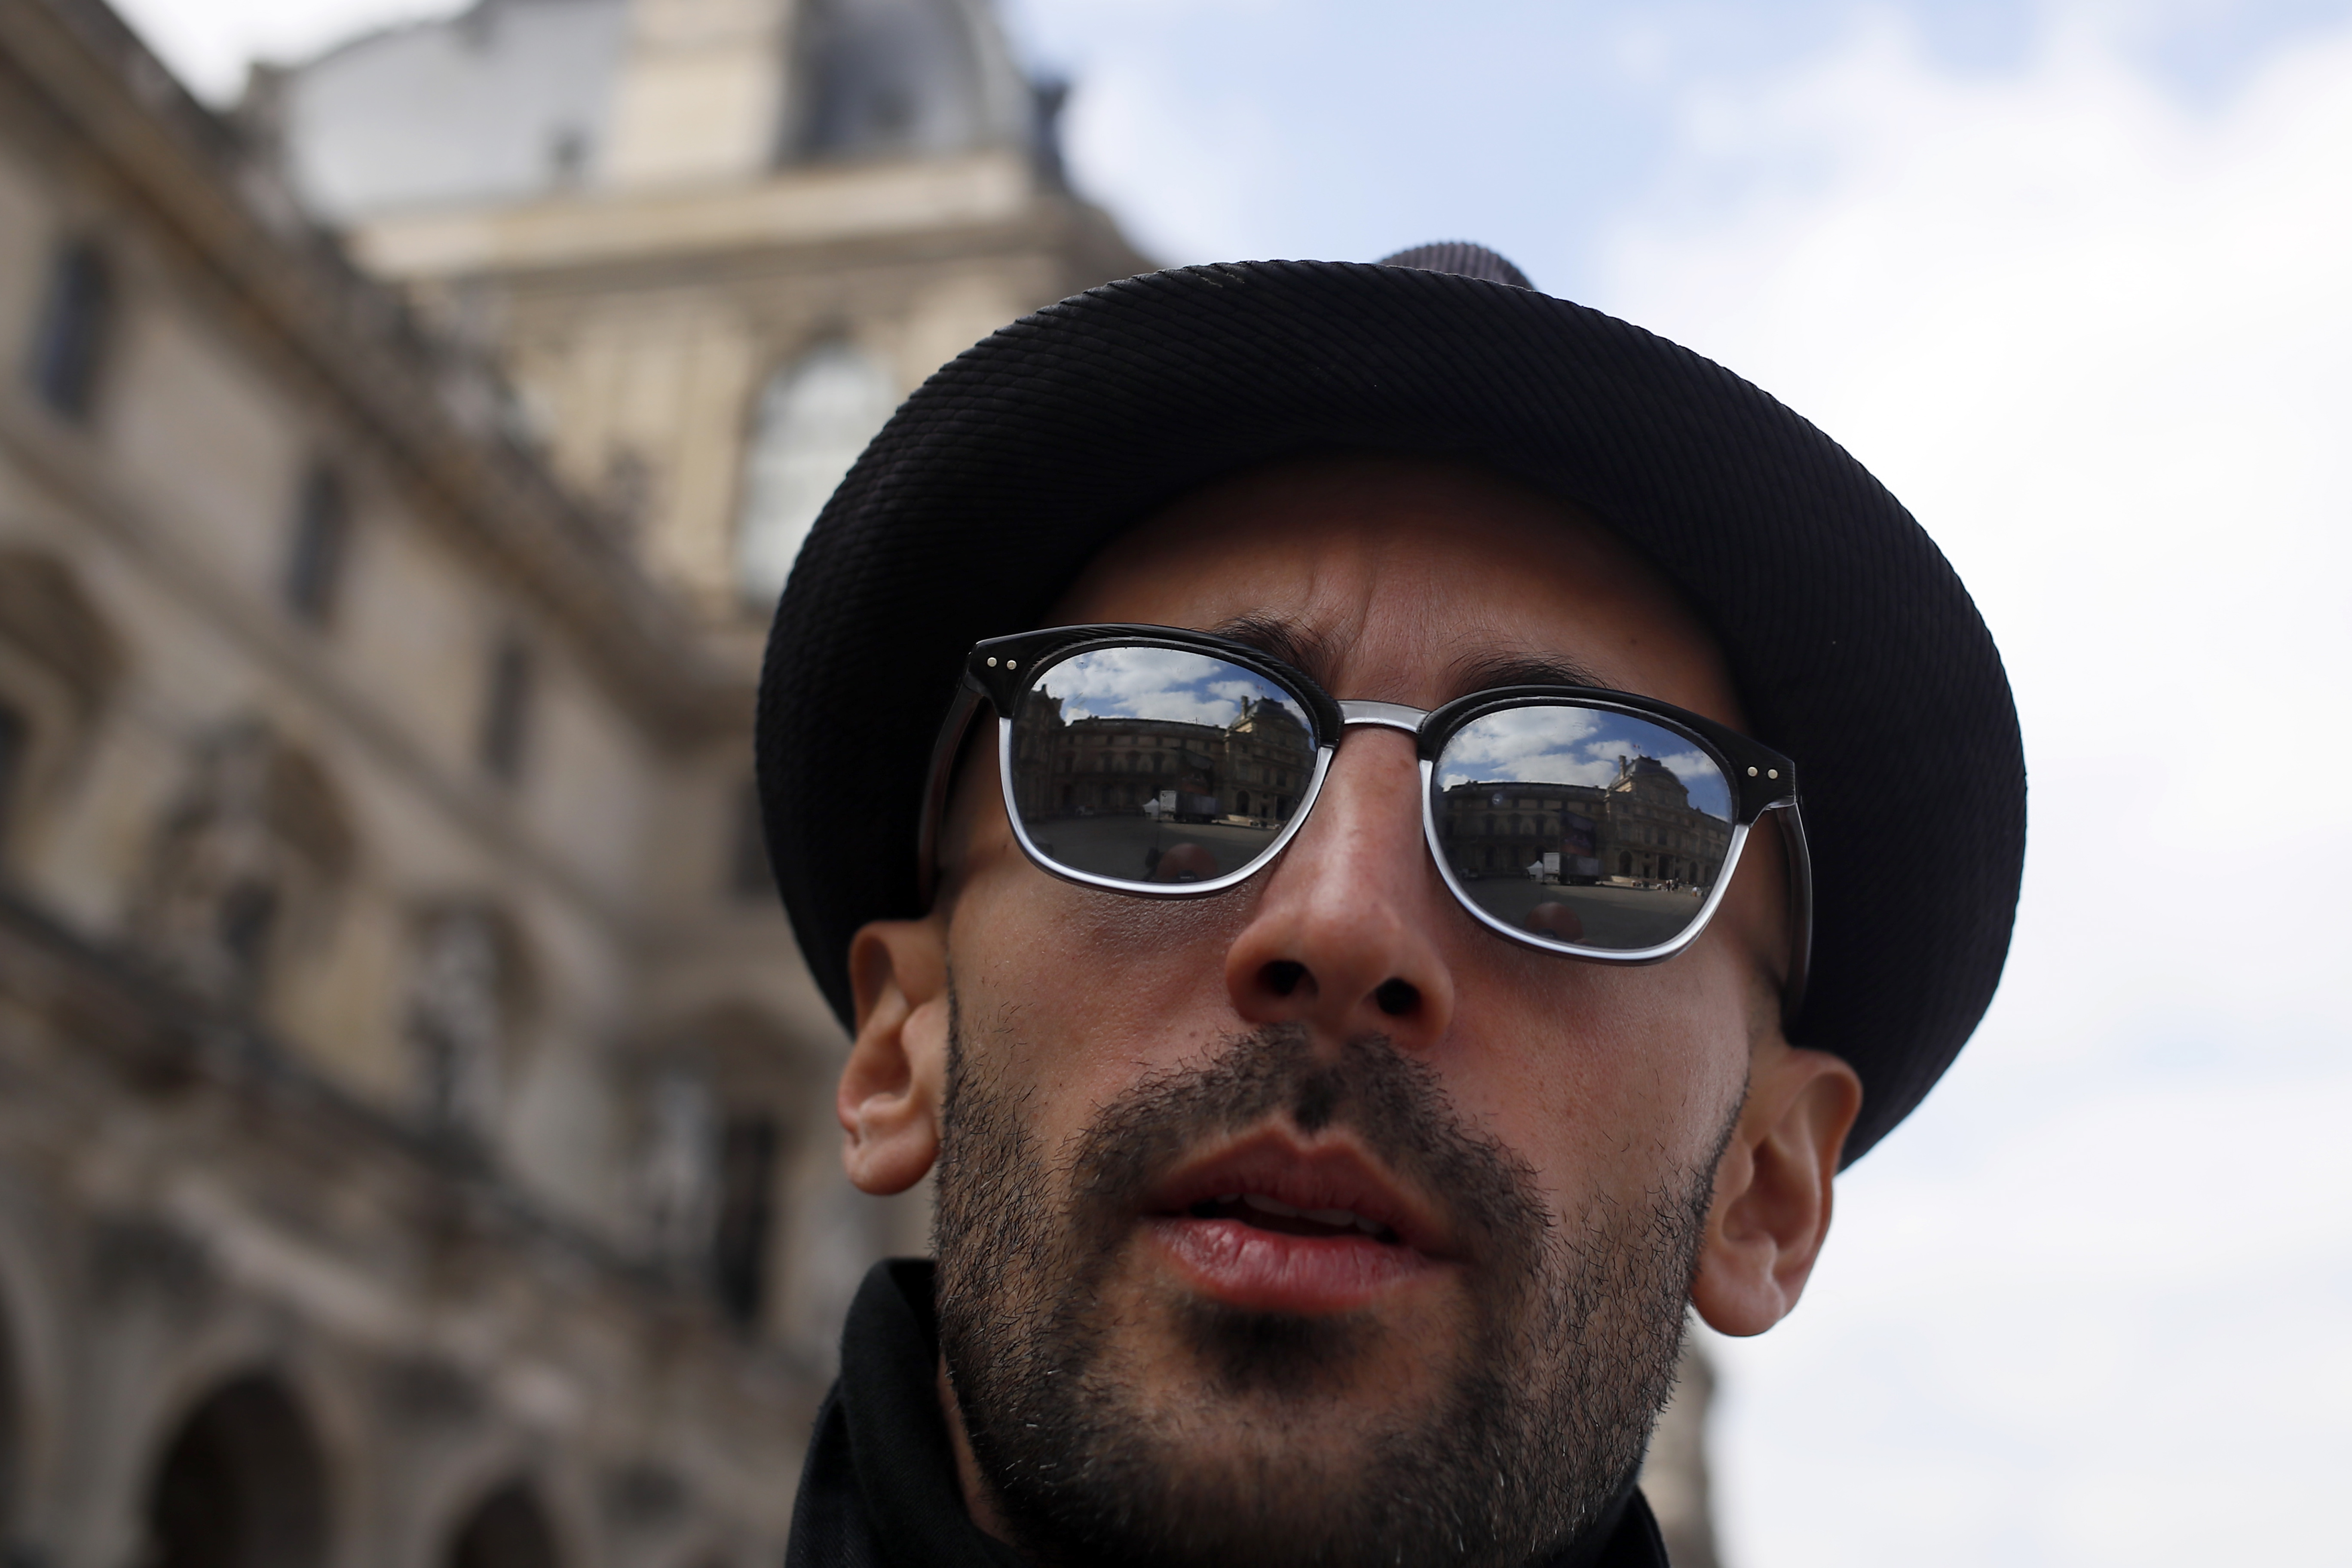 French street artist JR poses in the courtyard of the Louvre Museum near the glass pyramid designed by architect Leoh Ming Pei, in Paris, Wednesday, March 27, 2019 as the Louvre Museum celebrates the 30th anniversary of its glass pyramid. JR project is a giant collage of the pyramid to bring it out of the ground by revealing the foundations of the Napoleon courtyard where it is erected. (AP Photo/Francois Mori)